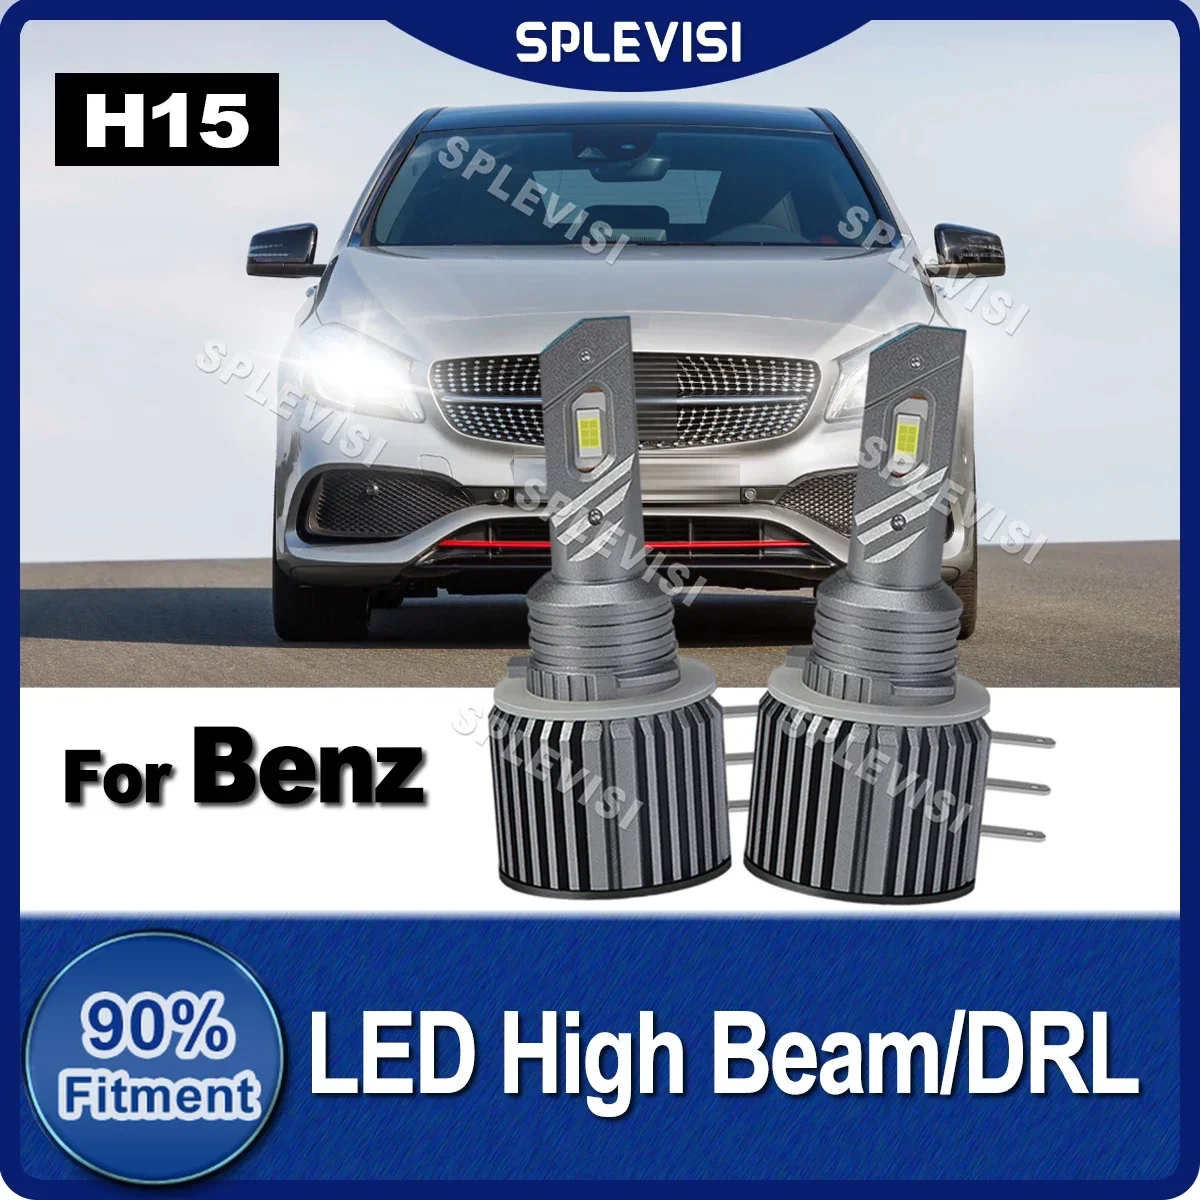 

1 Pair Canbus LED H15 High Beam Day Running Light For Mercedes-Benz W447 CLA X117 C117 A-Class W176 X204 X156 Sprinter